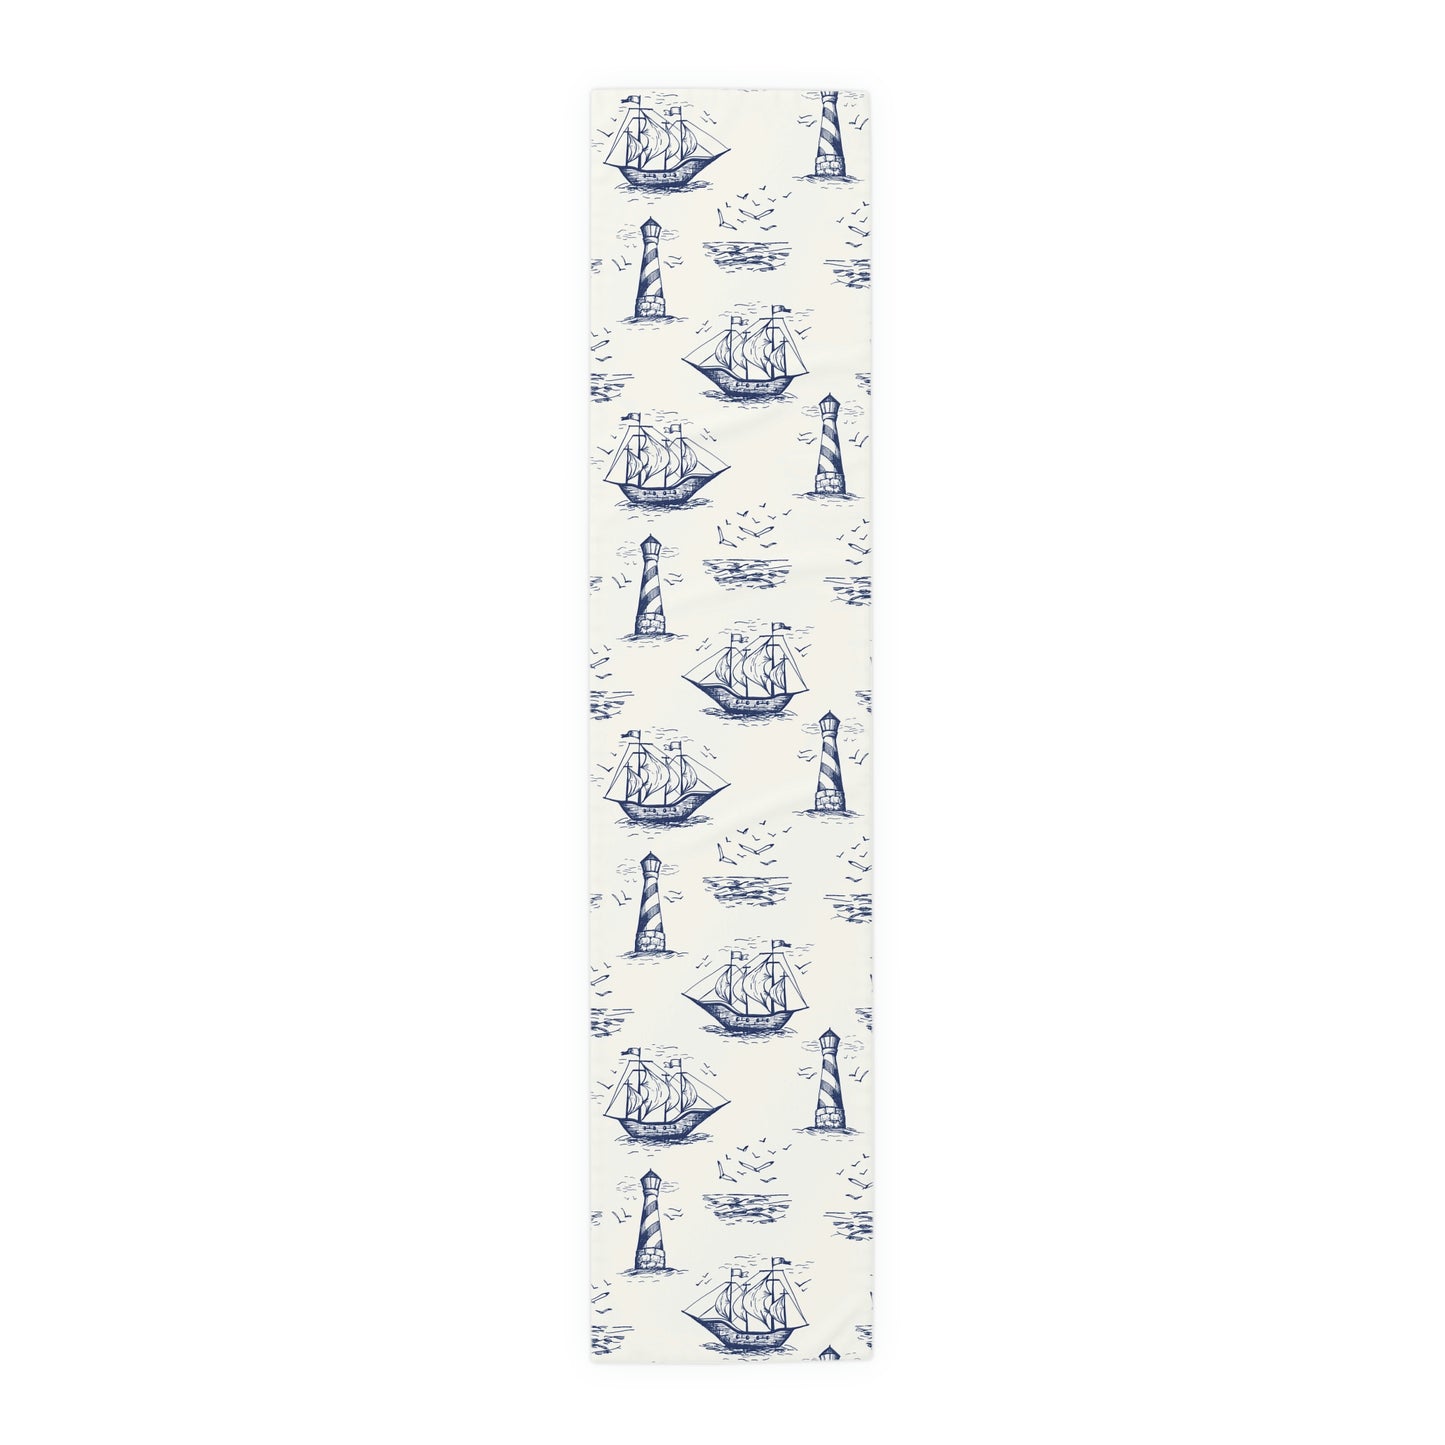 Vintage Ships Table Runner (Cotton, Poly)